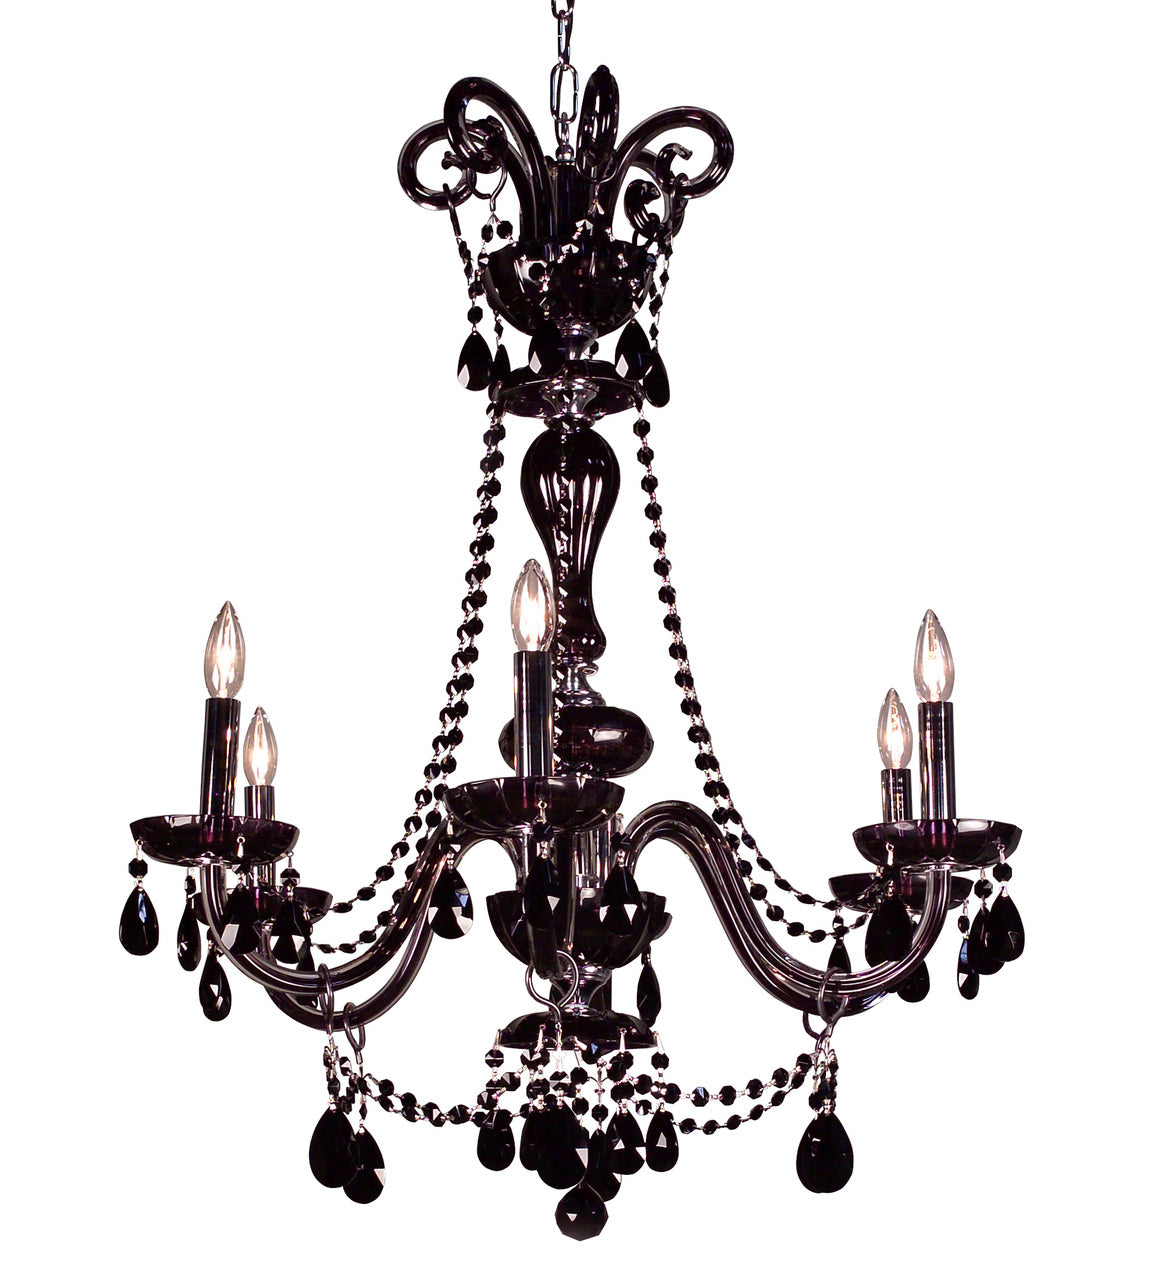 Classic Lighting 82016 SJT Monte Carlo Elite Crystal Chandelier in Black (Imported from Spain)